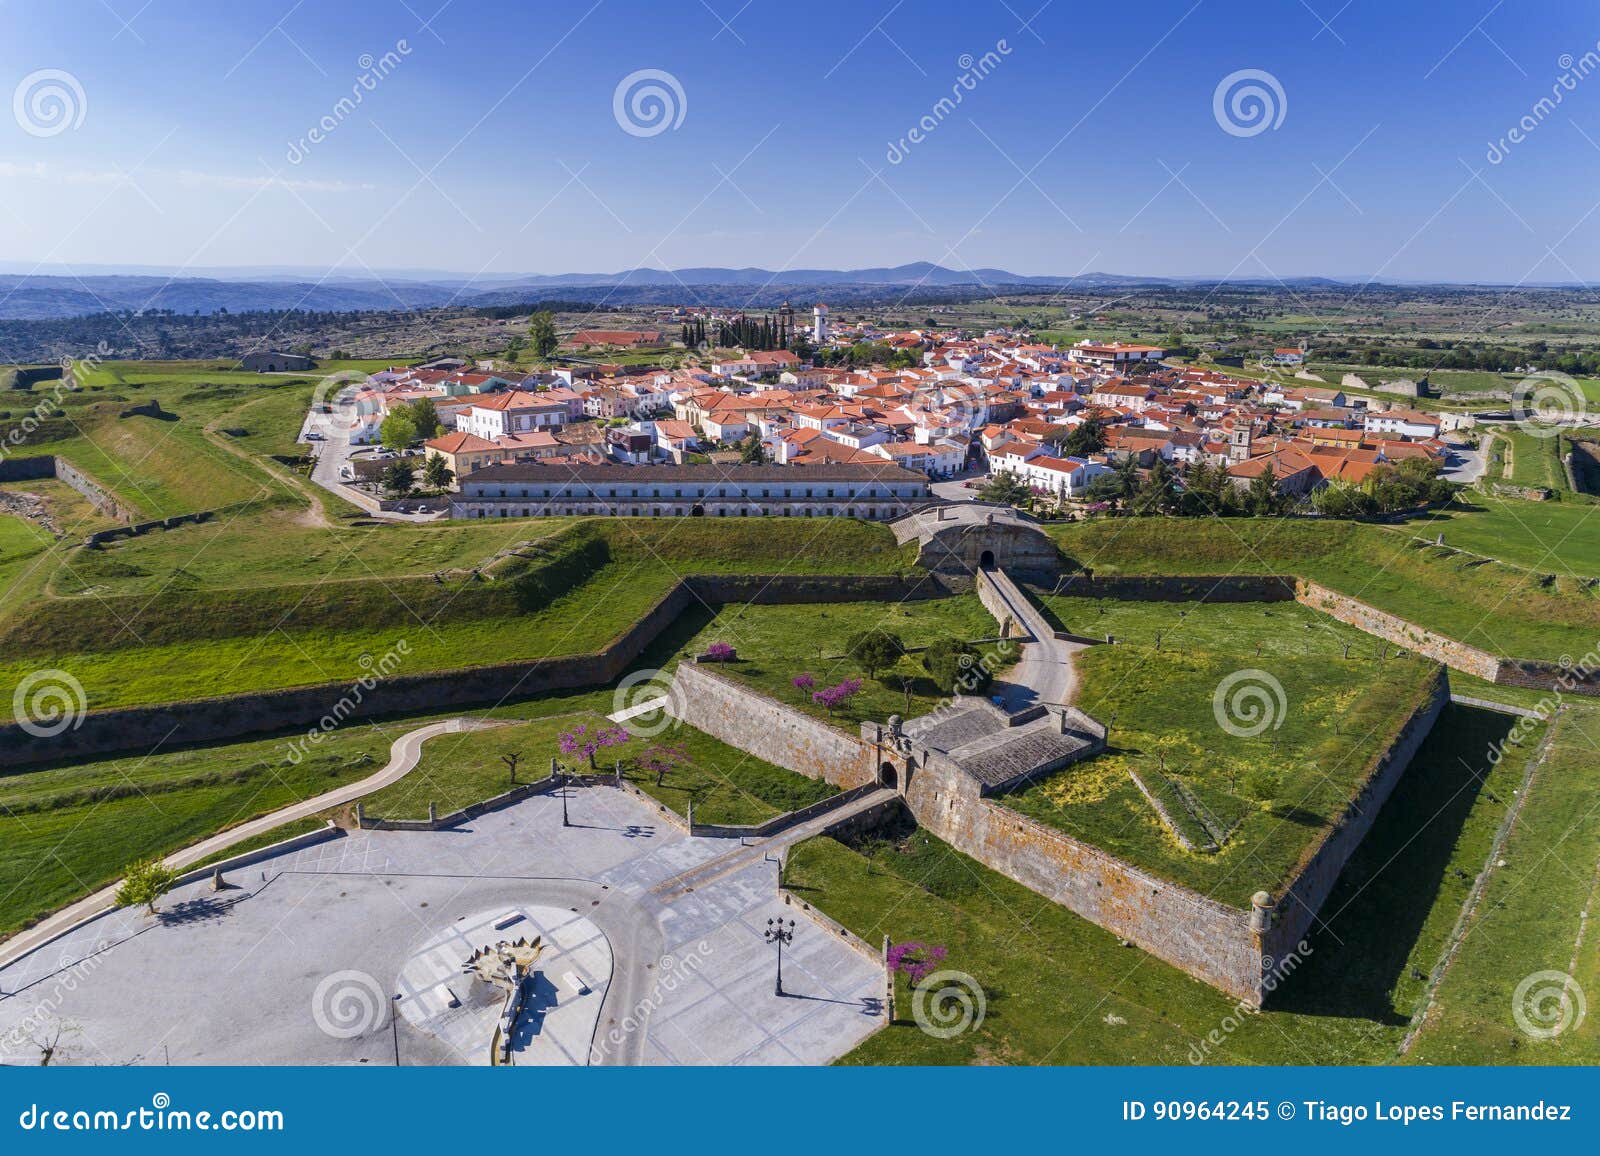 aerial view of the historic village of almeida in portugal